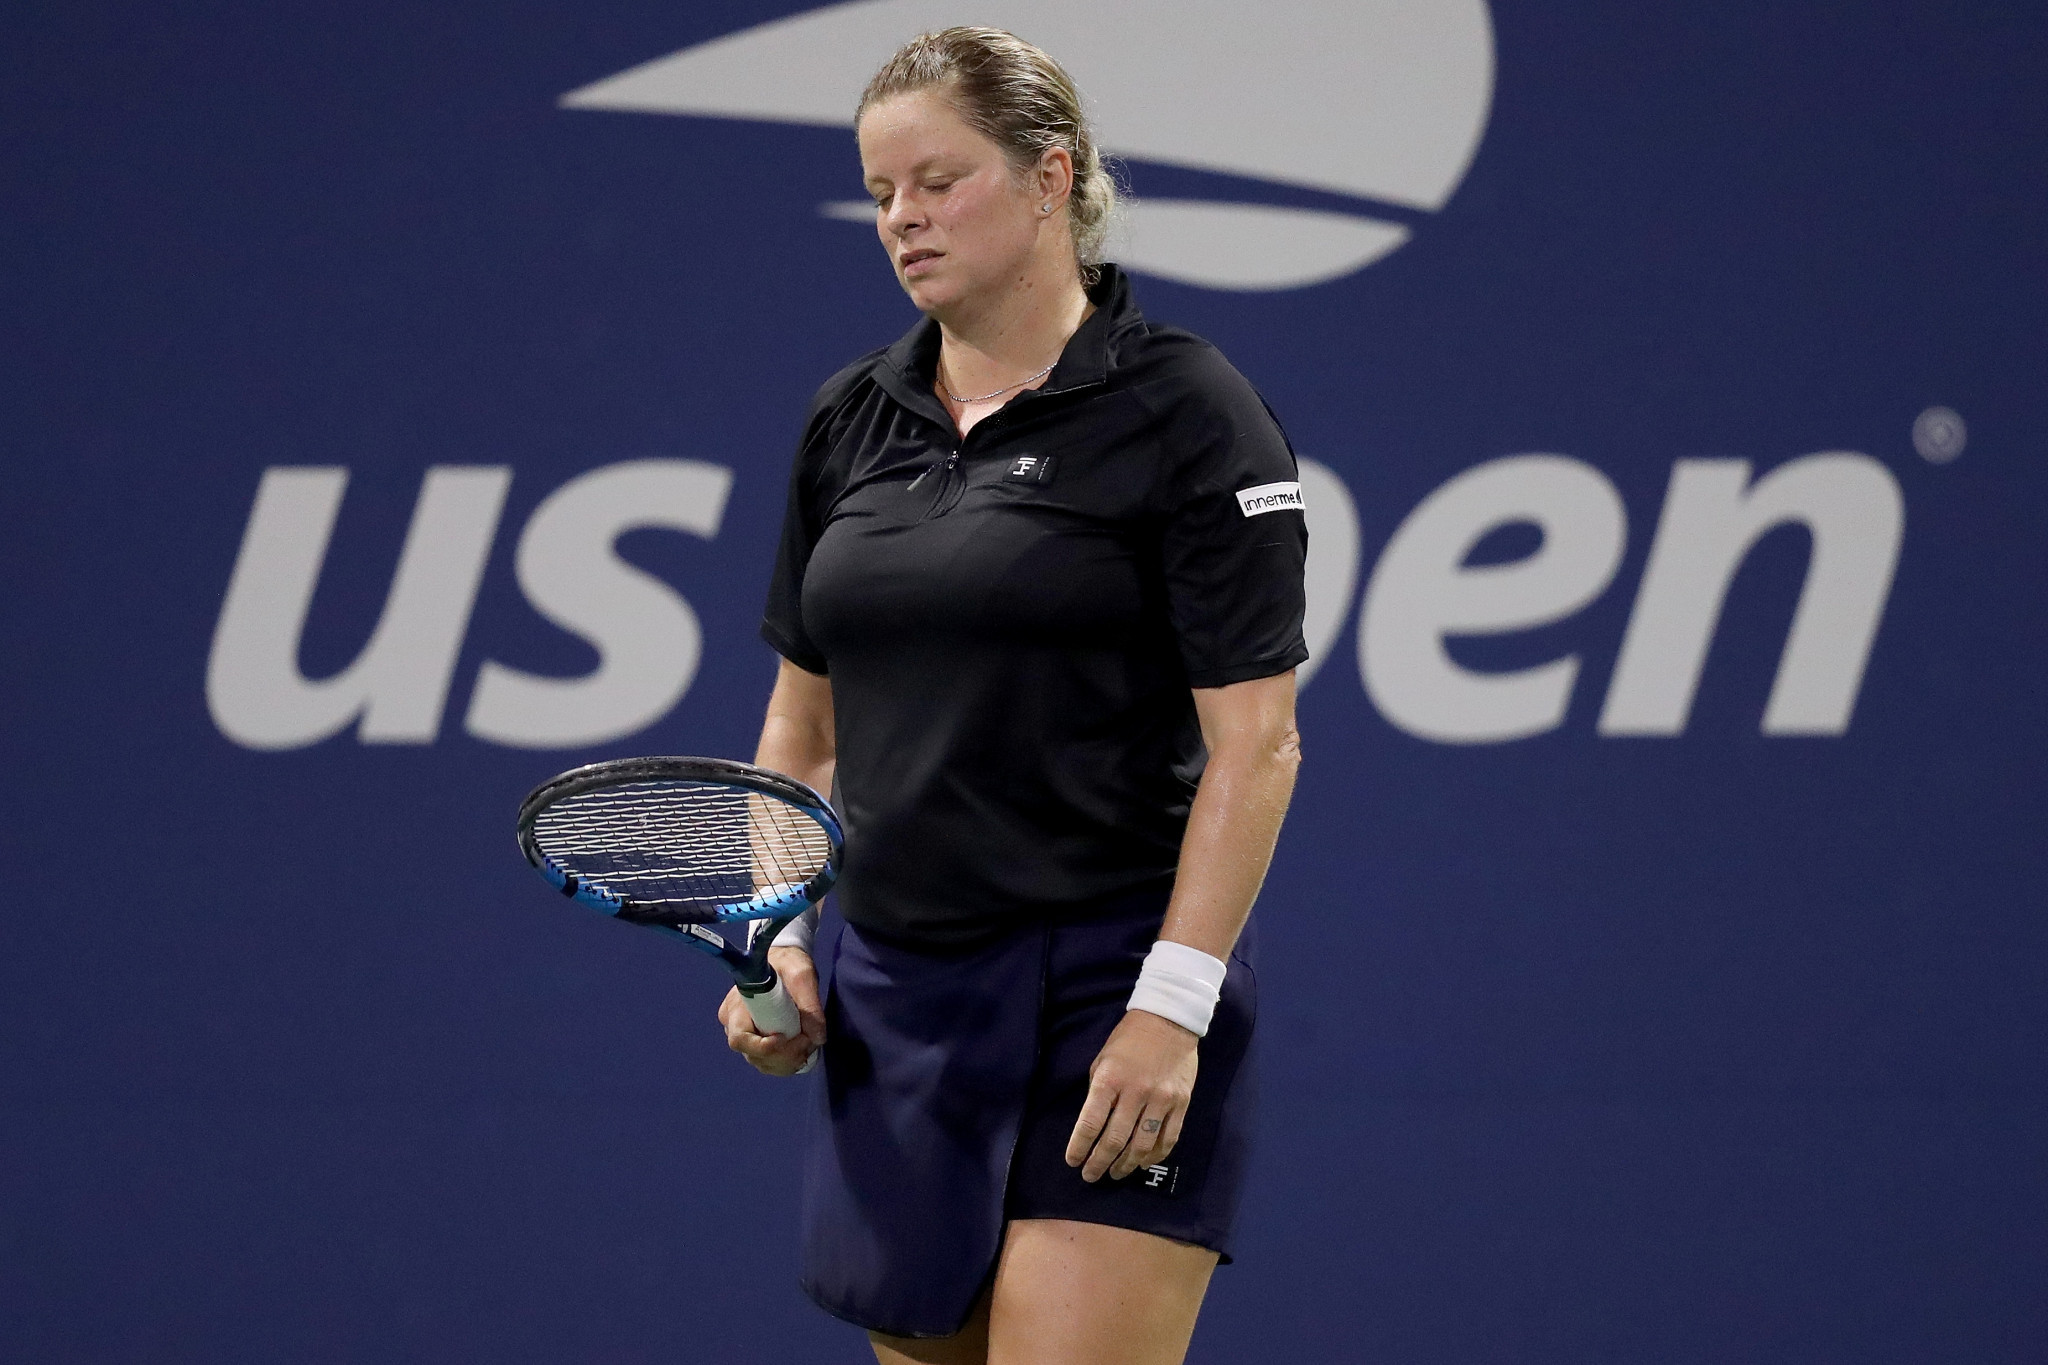 Kim Clijsters' first Grand Slam match in eight years ended in a three set defeat ©Getty Images